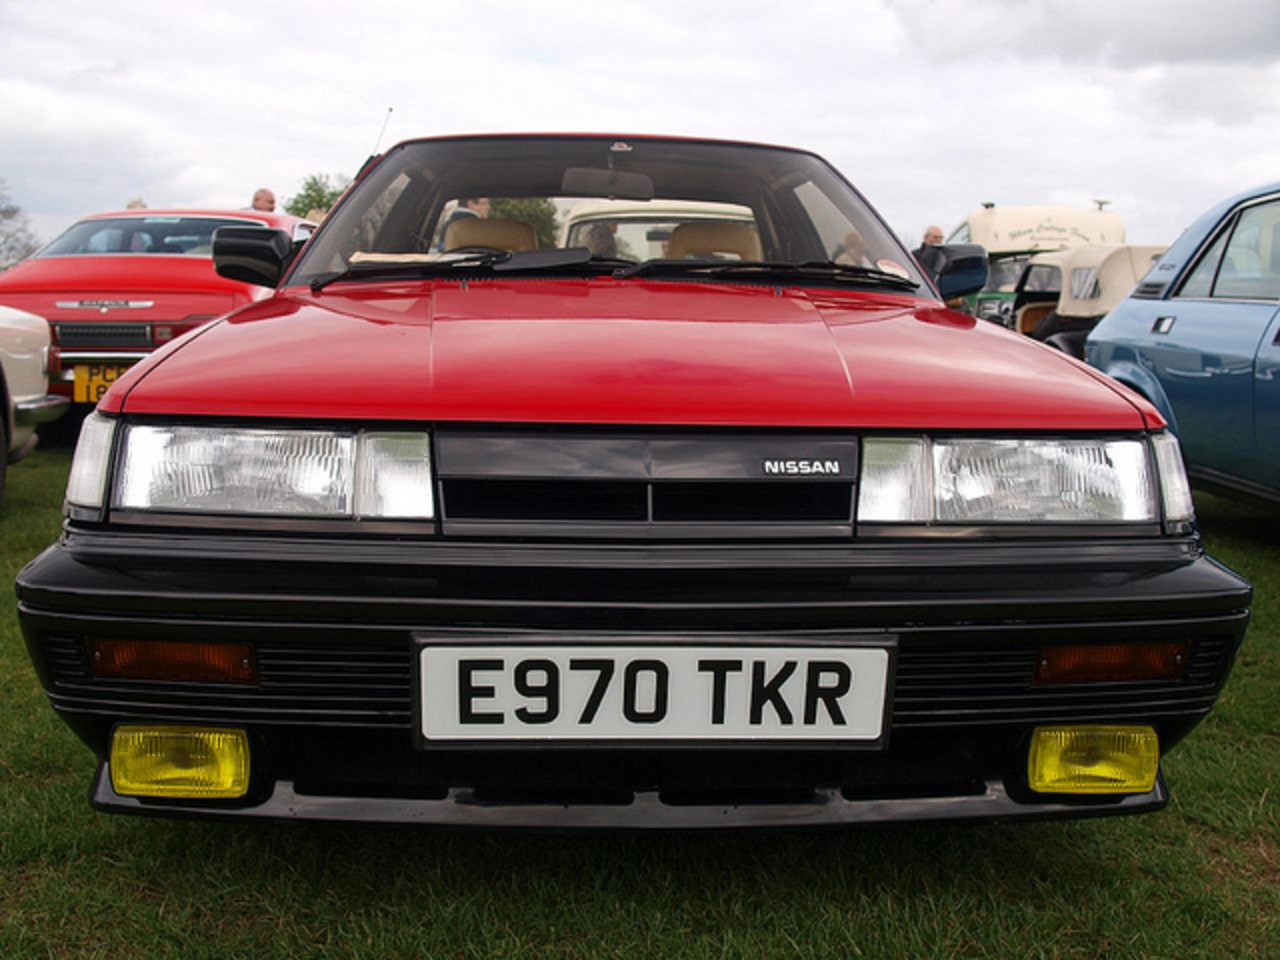 Nissan Sunny ZX RZ1 Coupe - 1987 | Flickr - Photo Sharing!